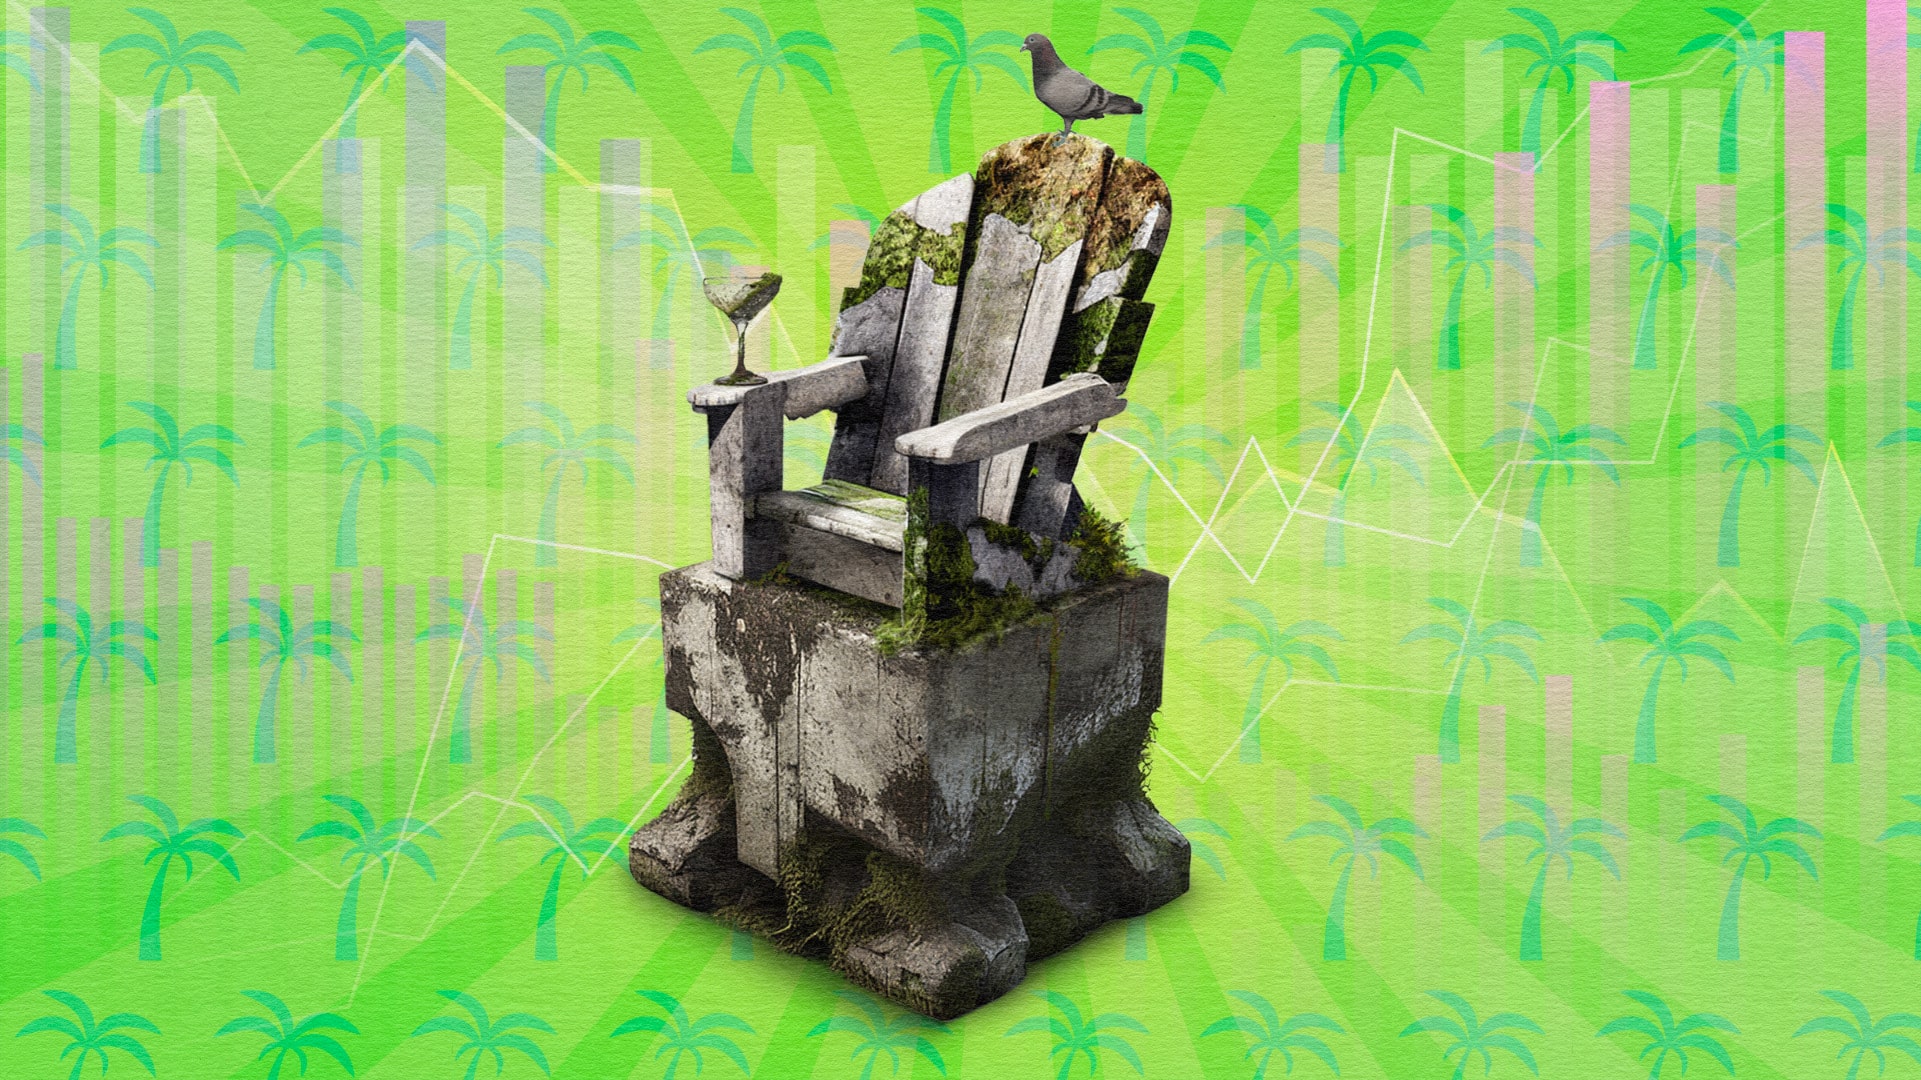 Adirondack chair and martini glass made to look like an ancient greek statue, complete with a pigeon, on a background of palm trees and stock charts.